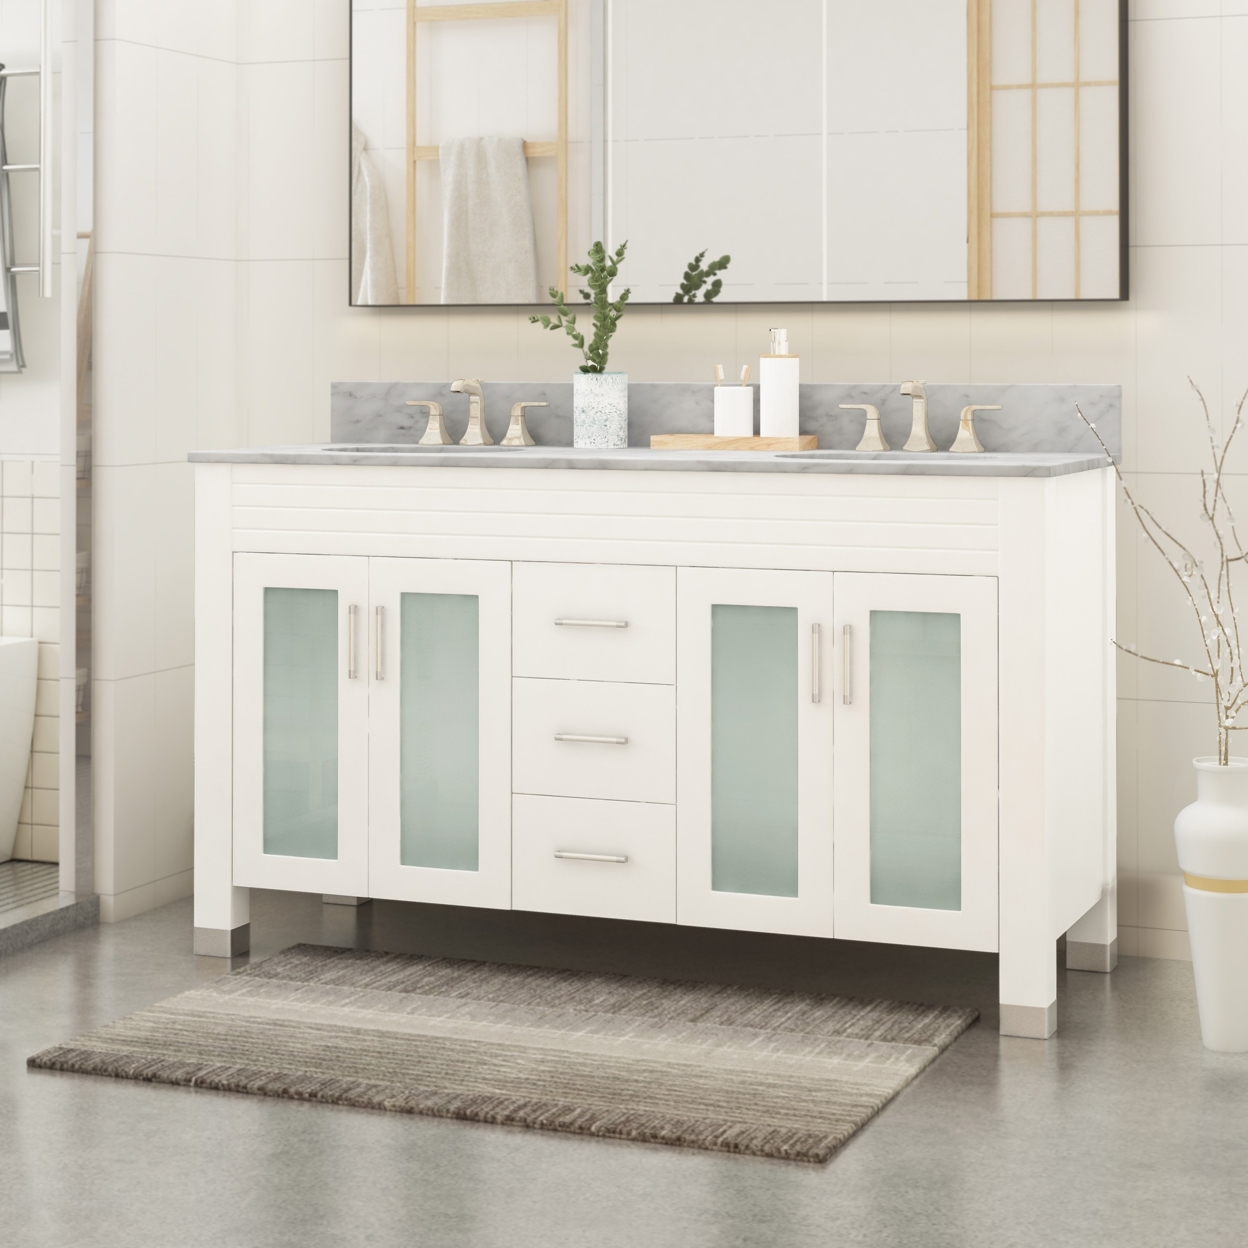 Holdame Contemporary 60 Wood Double Sink Bathroom Vanity With Marble Counter Top With Carrara White Marble - White